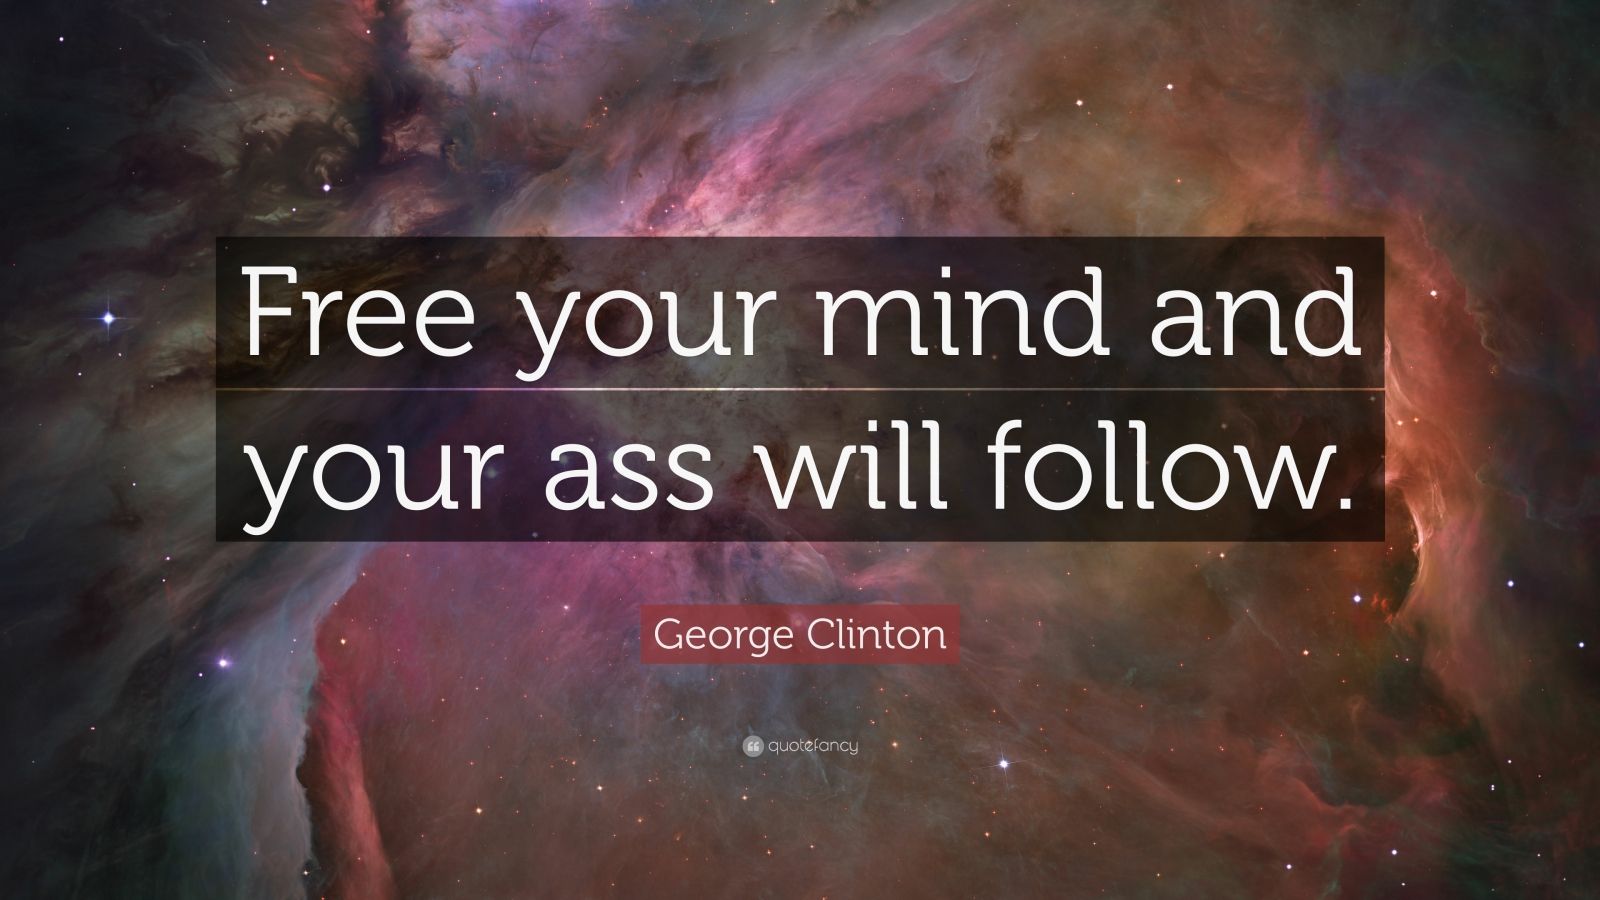 George Clinton Quote “free Your Mind And Your Ass Will Follow” 12 